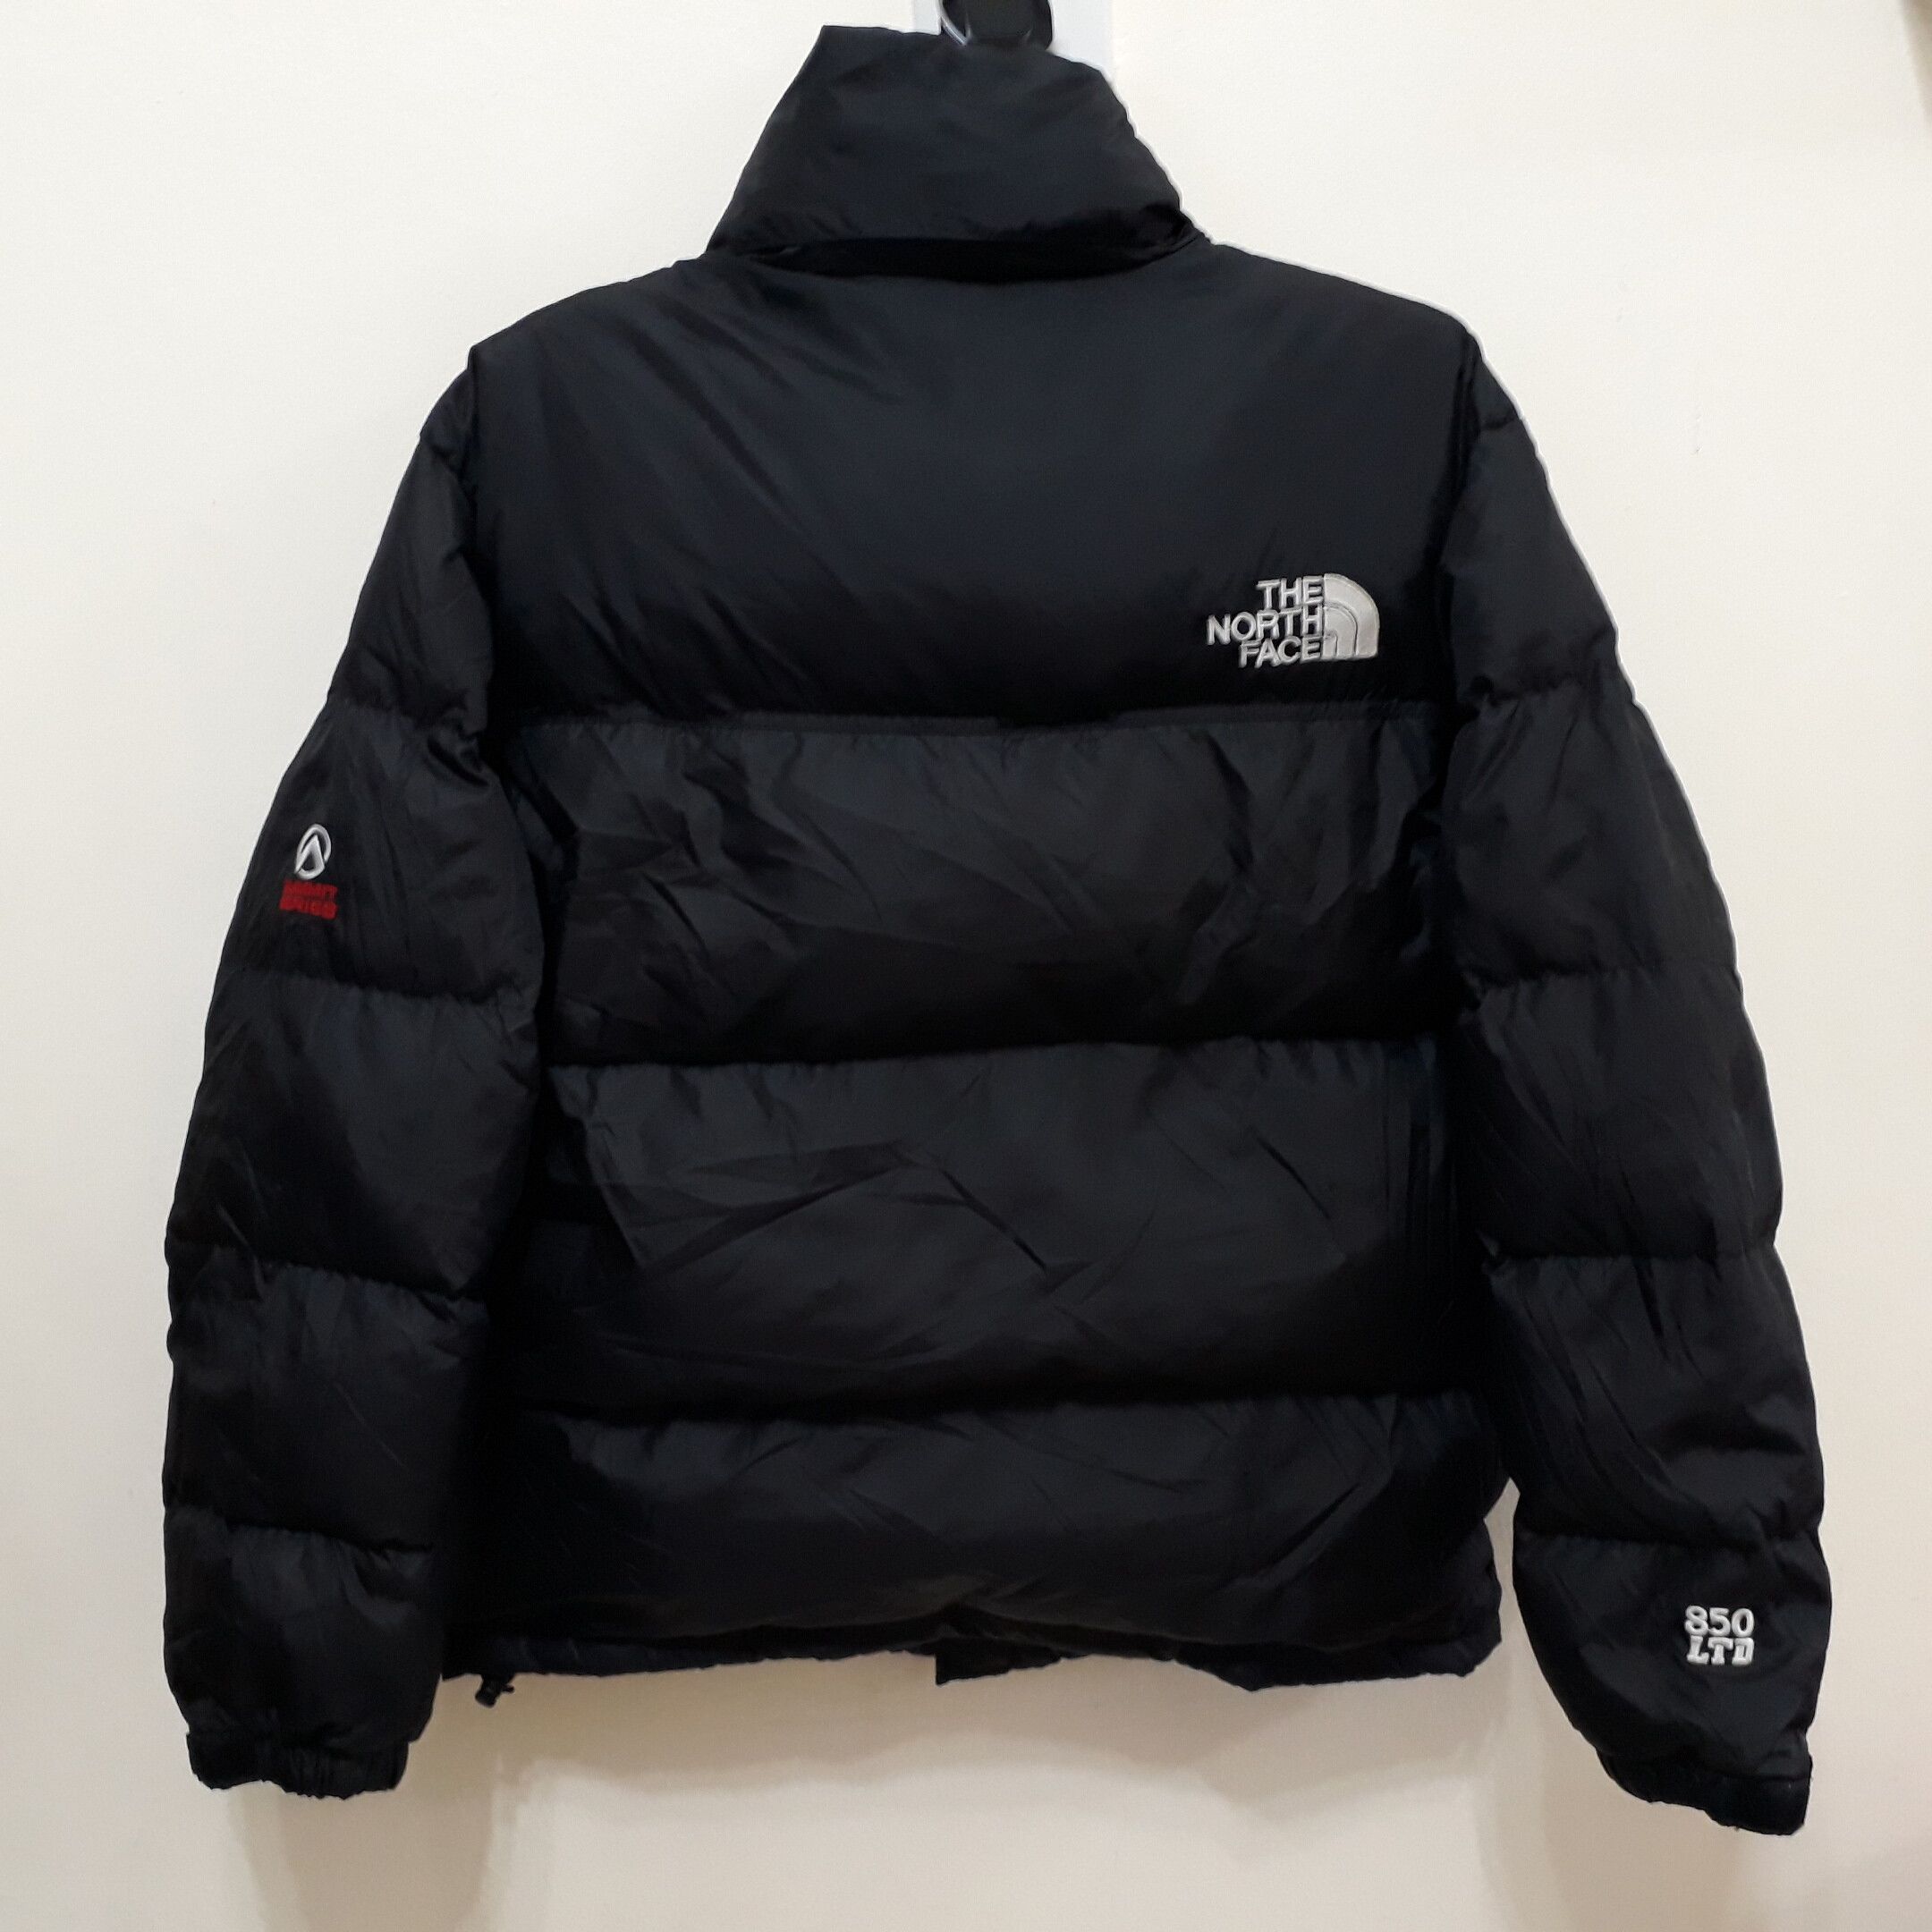 The North Face The North Face Limited Edition Winter 2011 Goose Down Summit Series 850Ltd Puffer Quilted Bomber Jacket Hoodie Size US M / EU 48-50 / 2 - 2 Preview